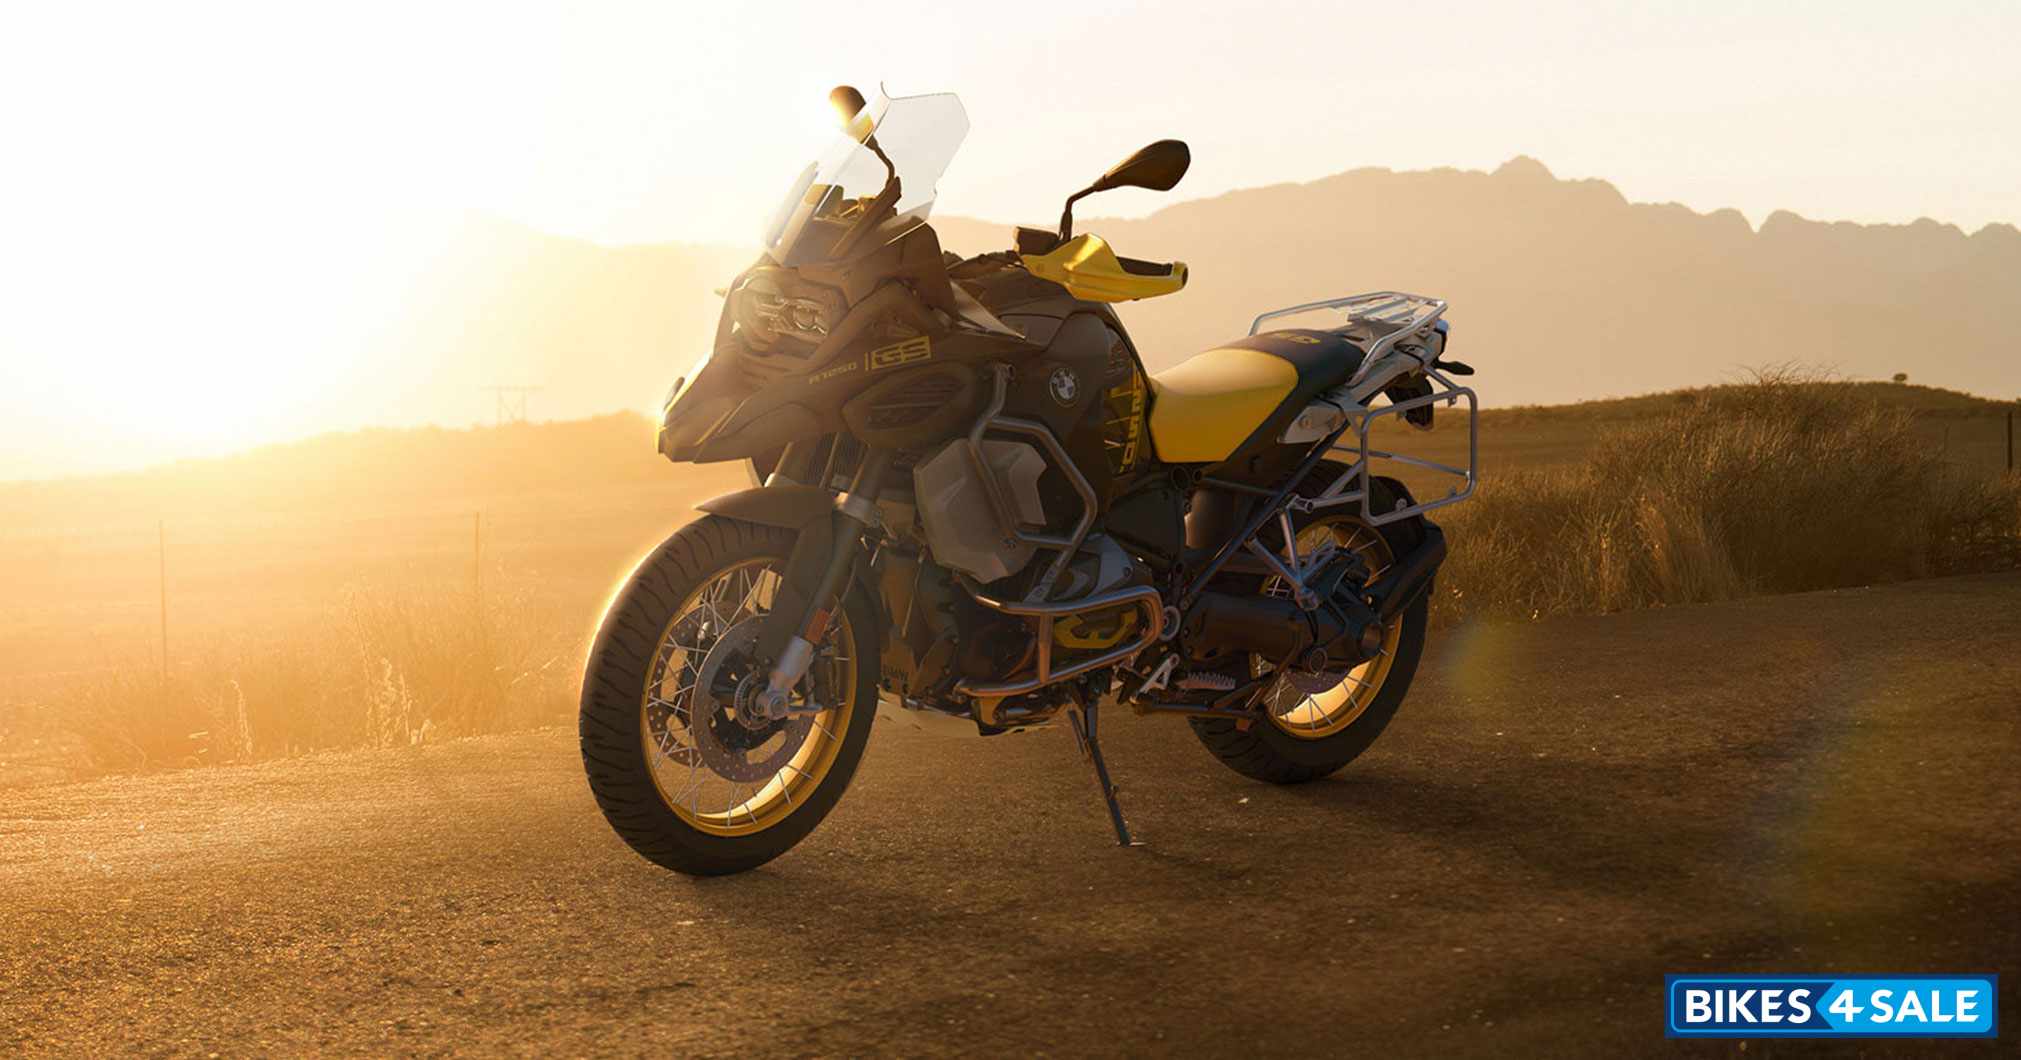 BMW R 1250 GS Adventure 40 Years GS Edition